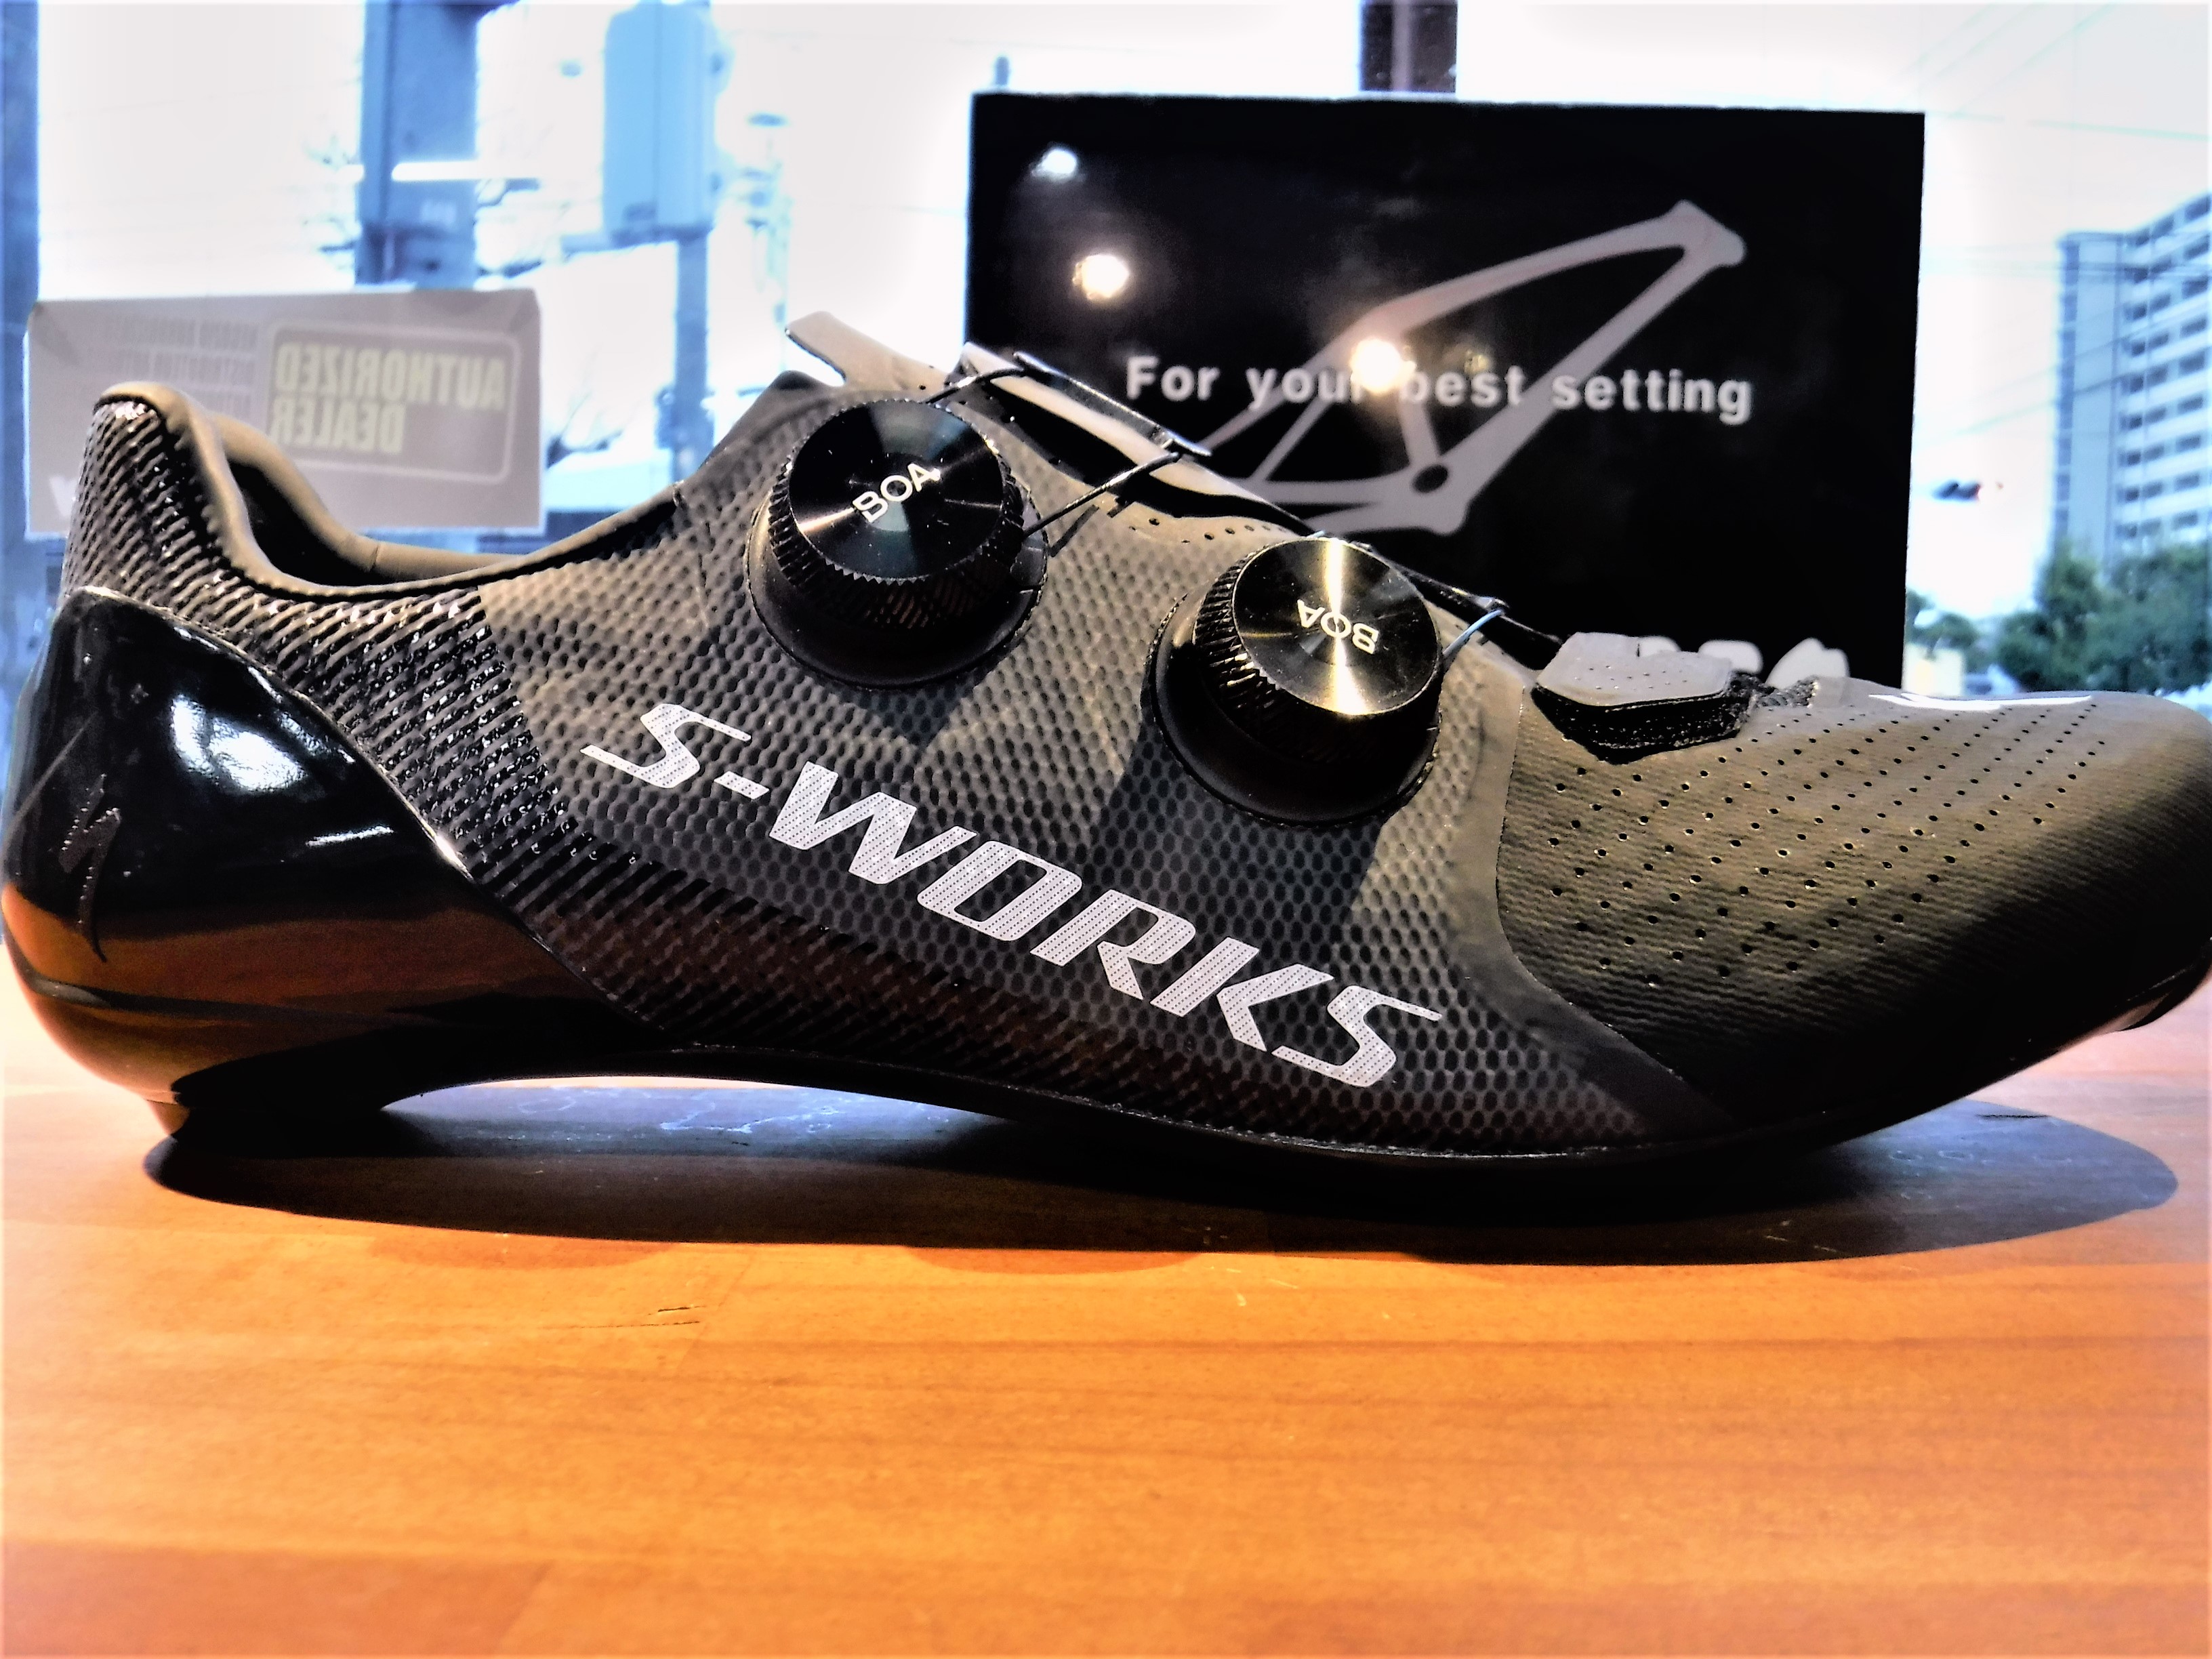 S-Works 7 SHOES | バイシクルセオ新松戸